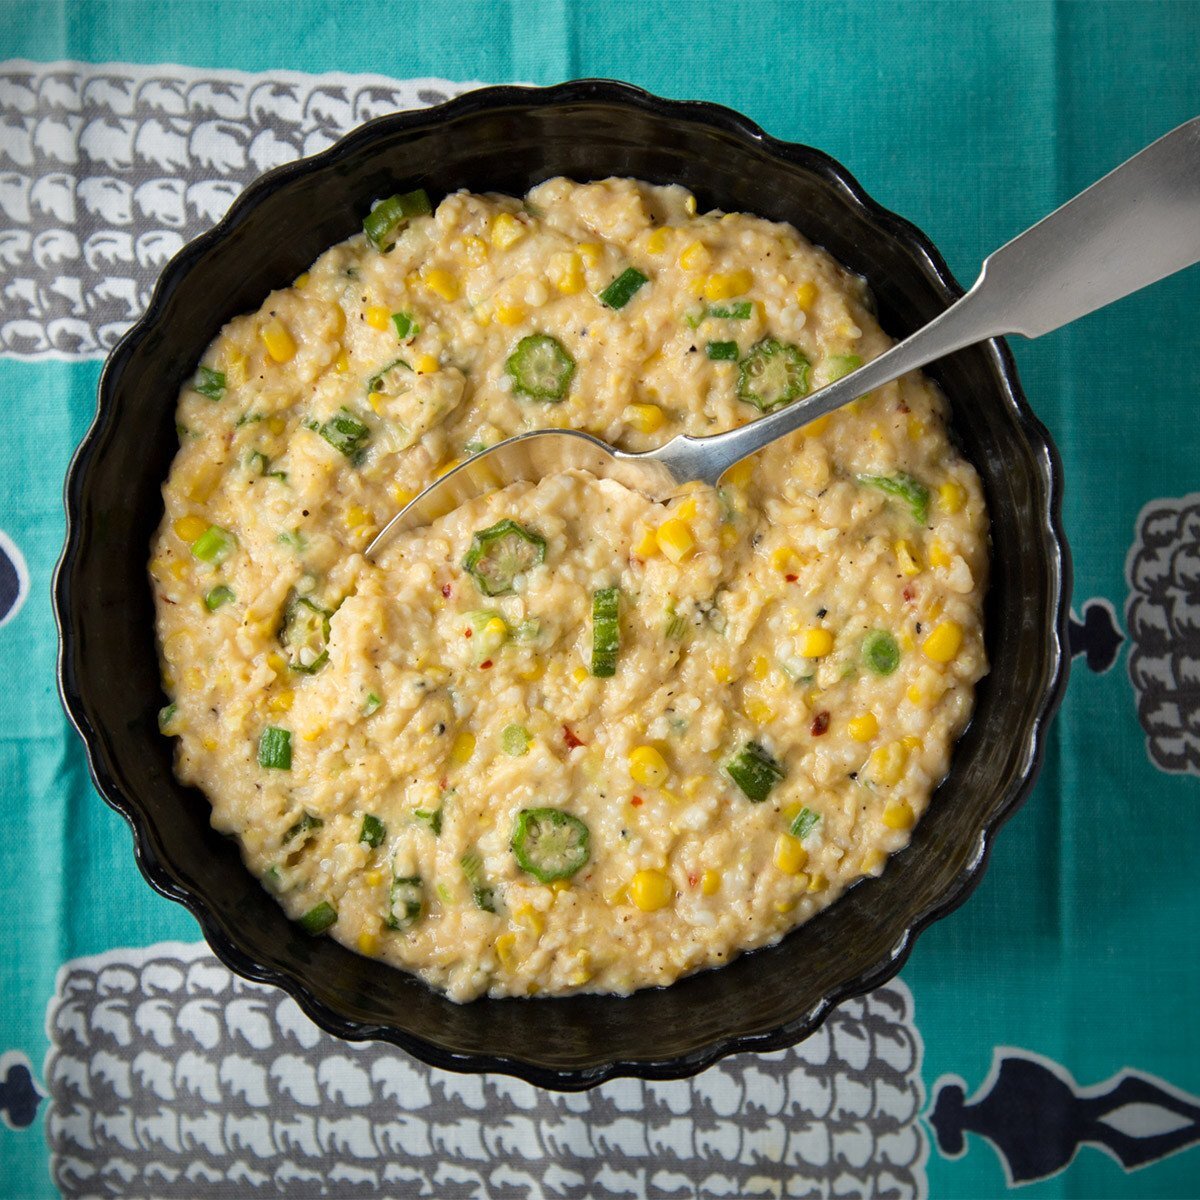 Smoked Cheddar Cheese Grits with Corn and Okra